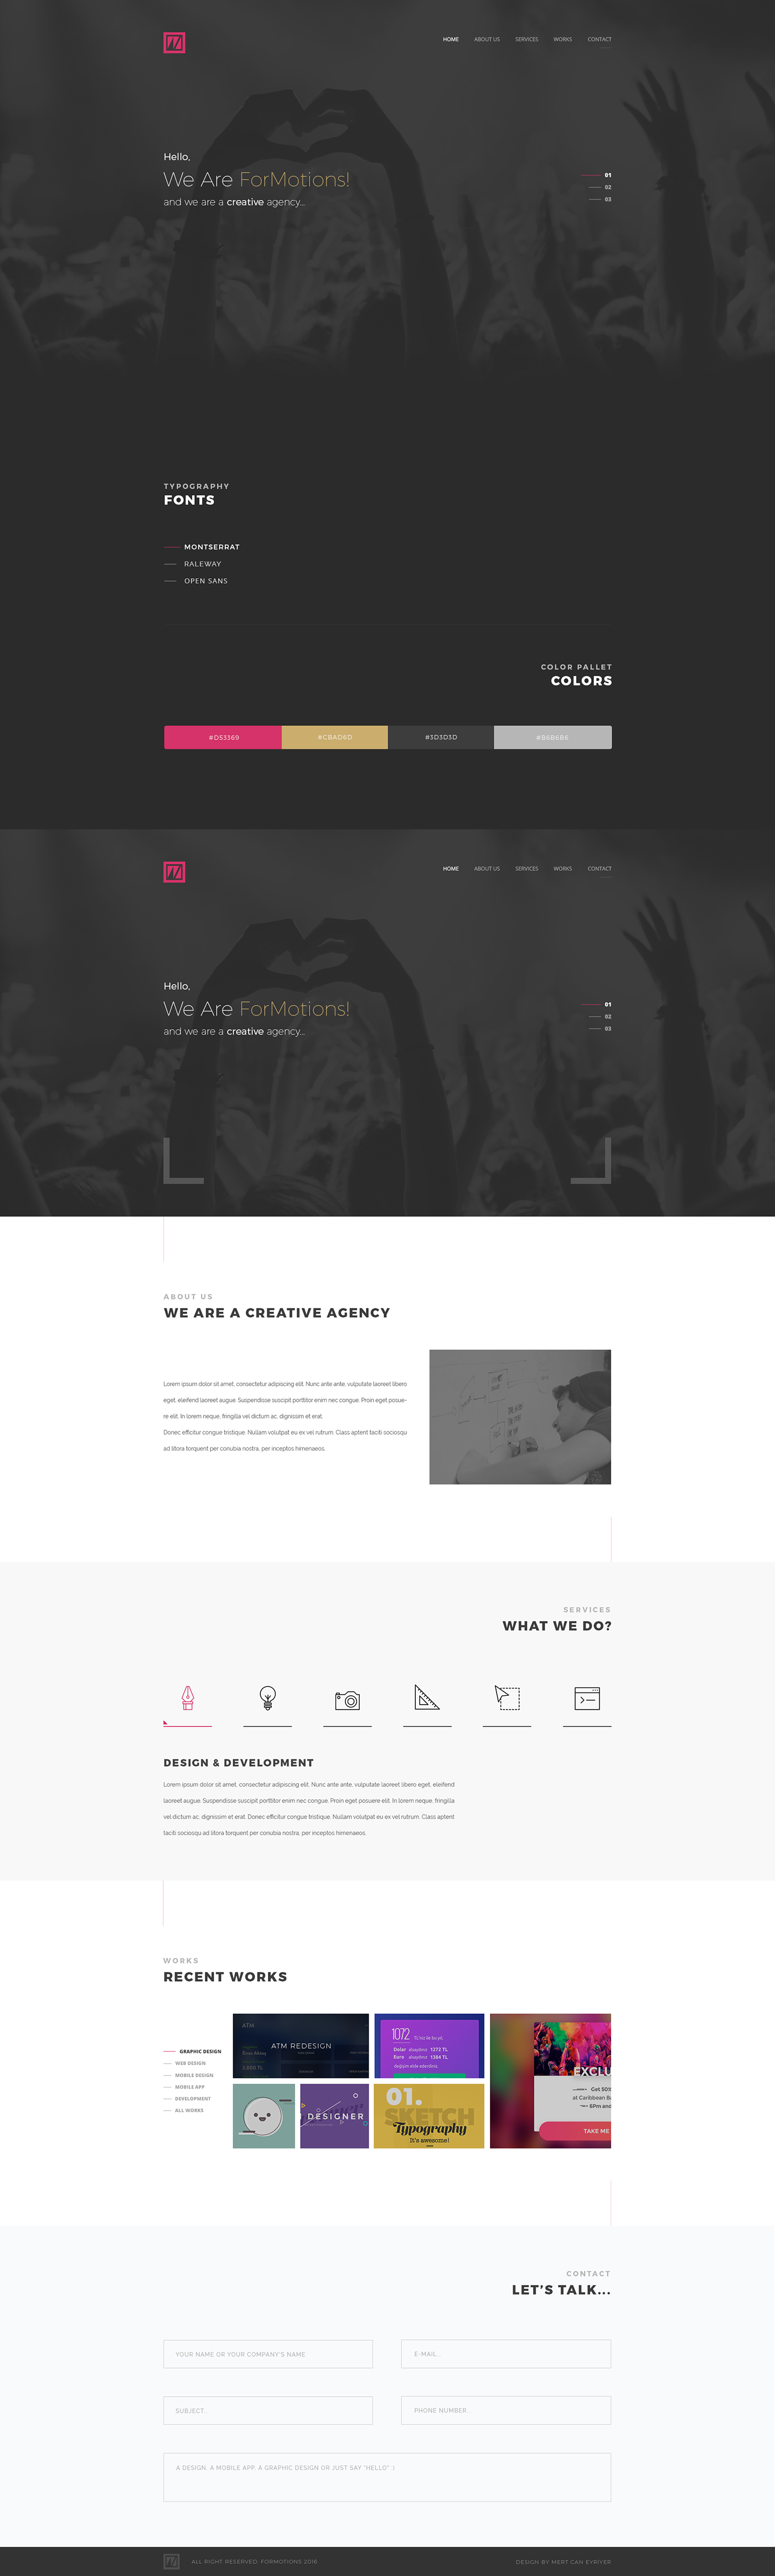 ForMotions - Agency Web Site Design